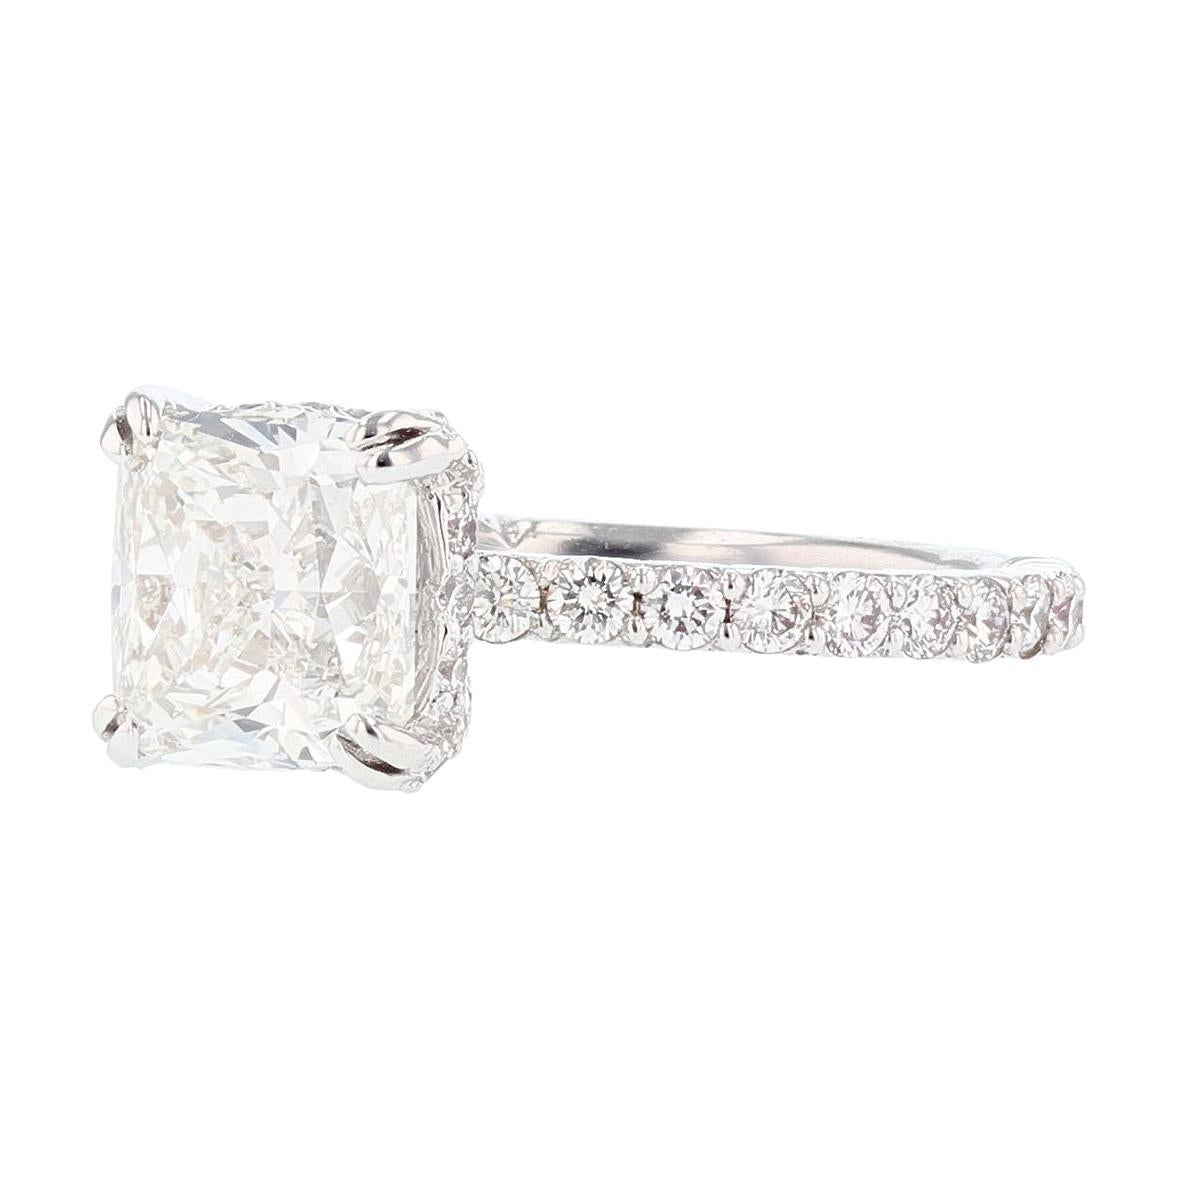 This ring is made in platinum and 14K white gold. The center diamond is a 2.70ct GIA certified cushion cut diamond with a color grade (G) and clarity grade (SI1) clarity. The certificate number is 